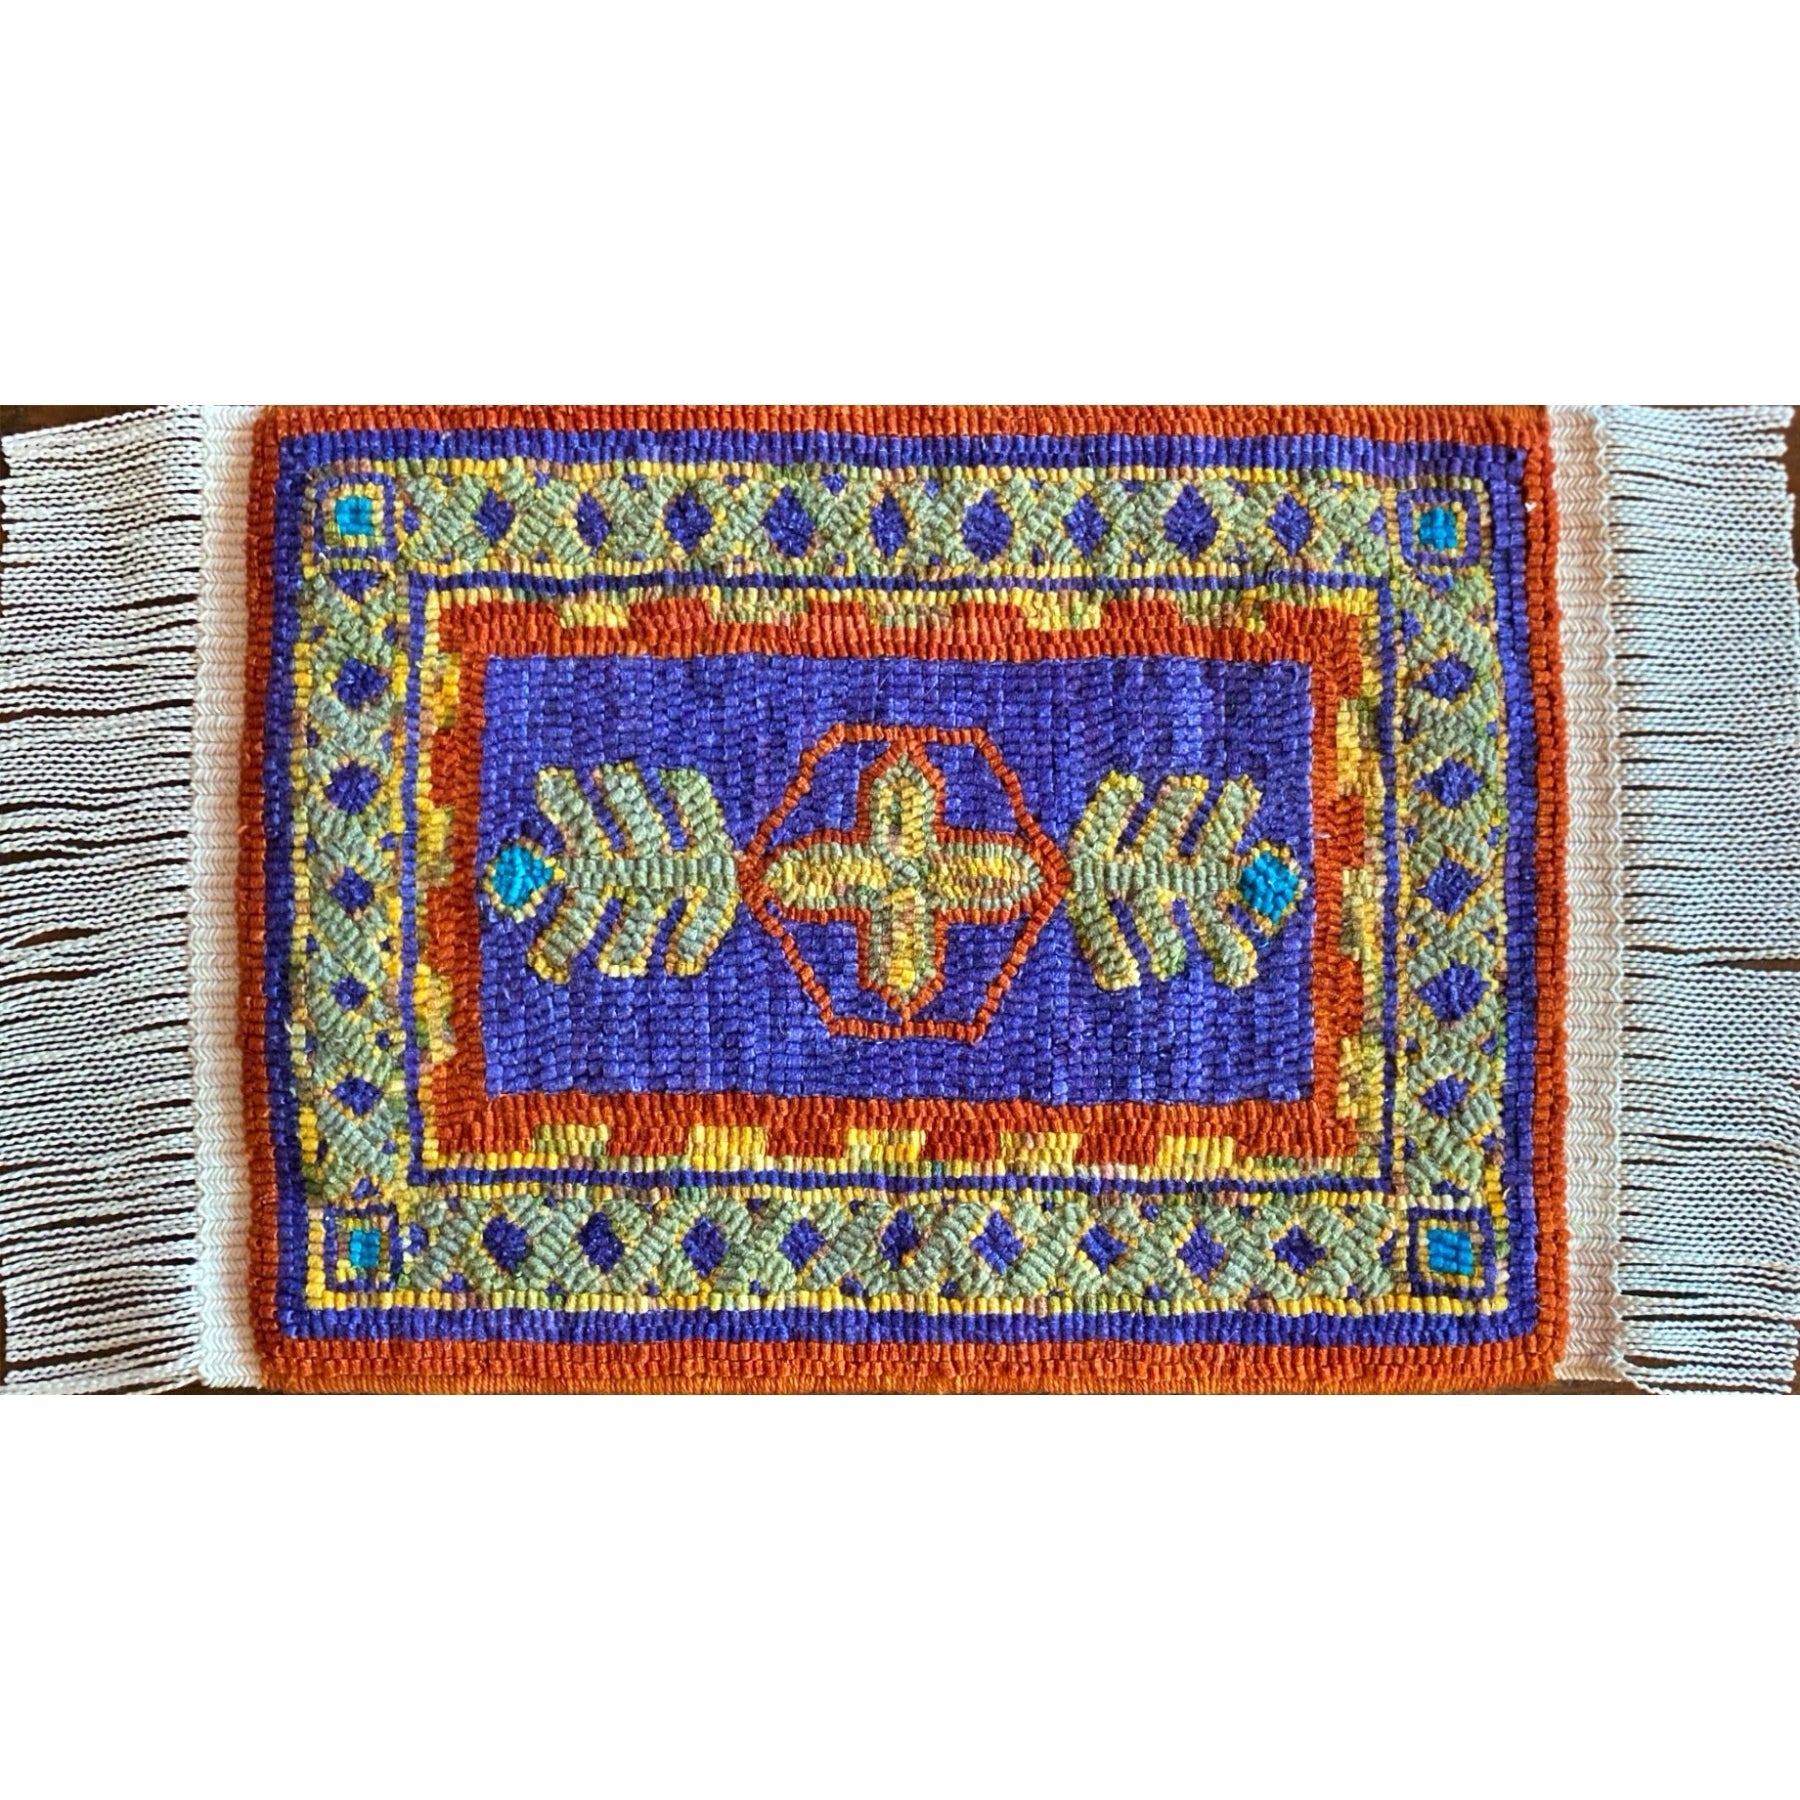 Afshar, rug hooked by Sandy Myers